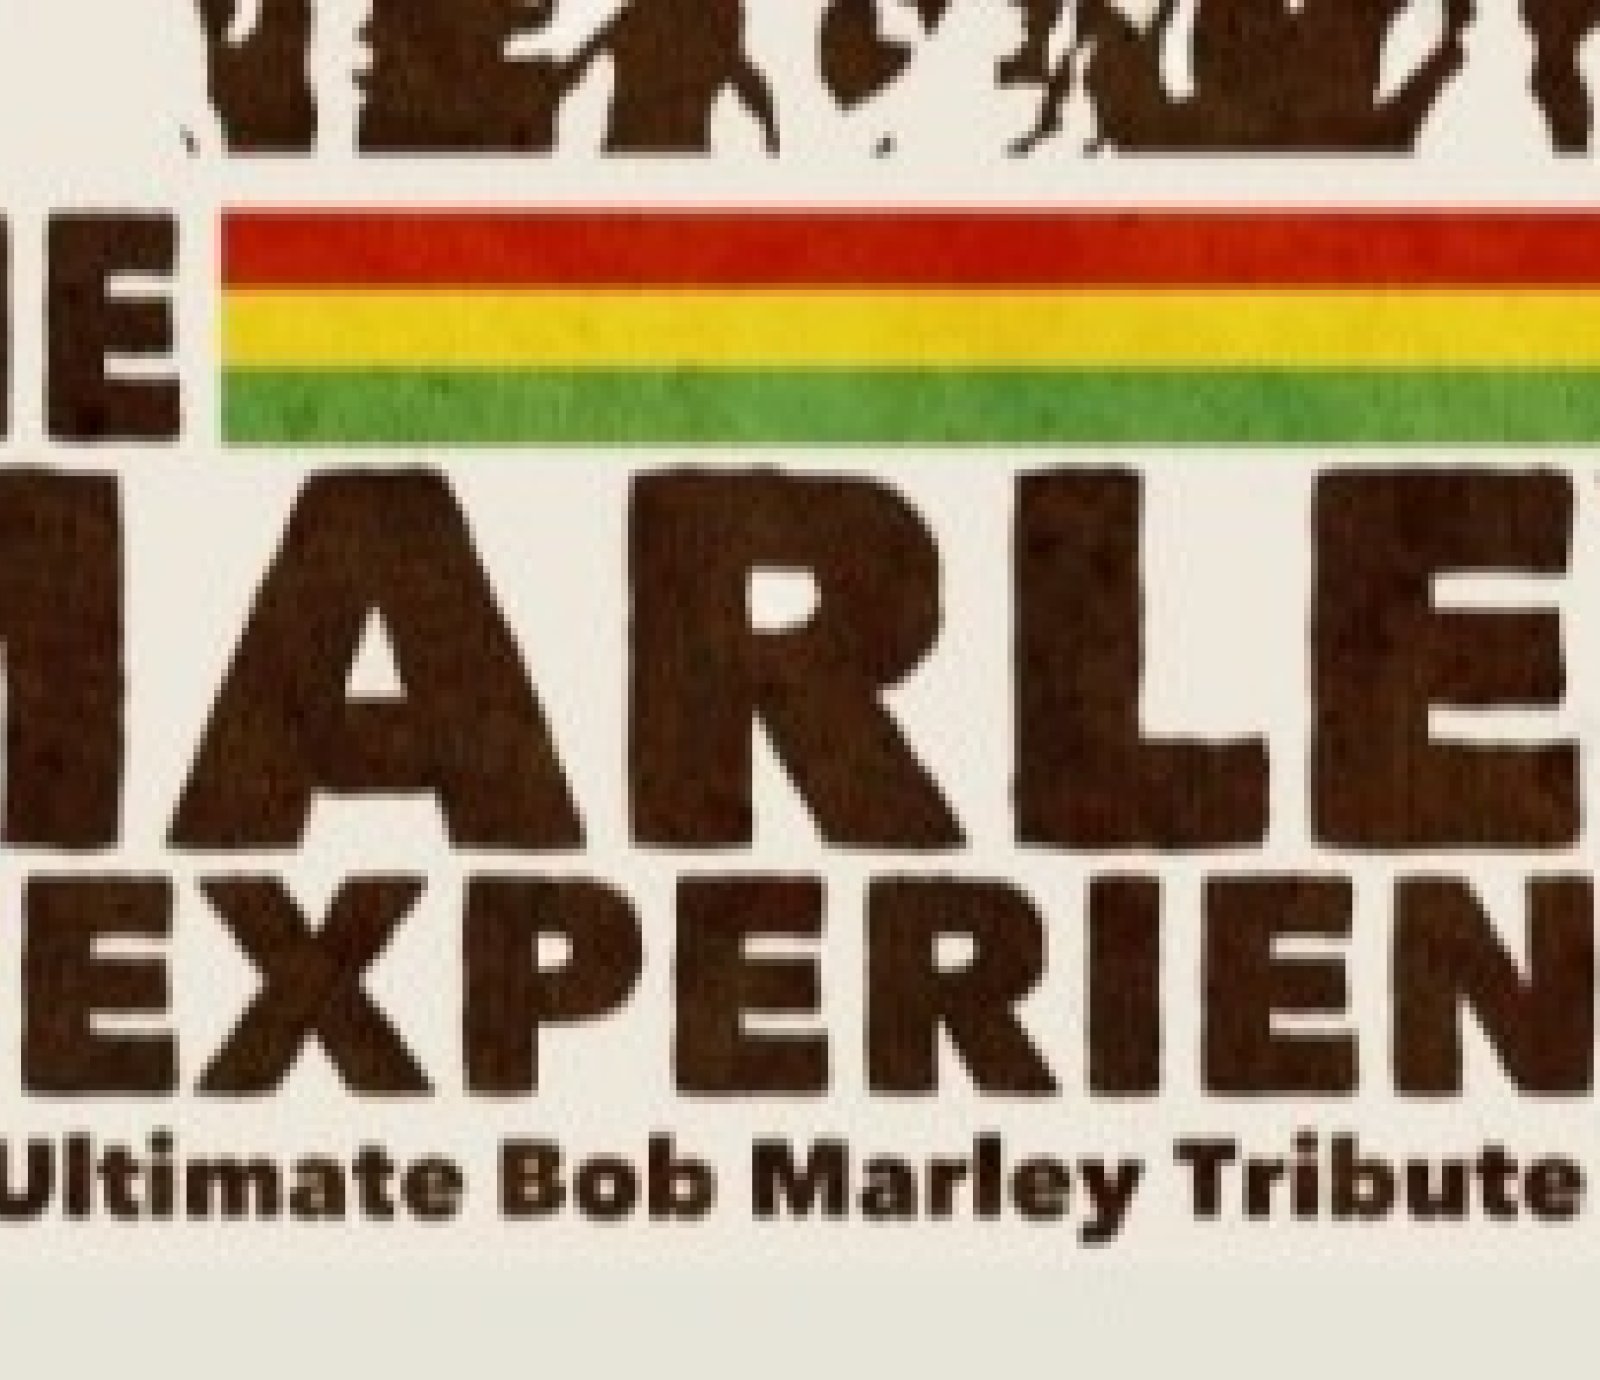 The Marley Experience